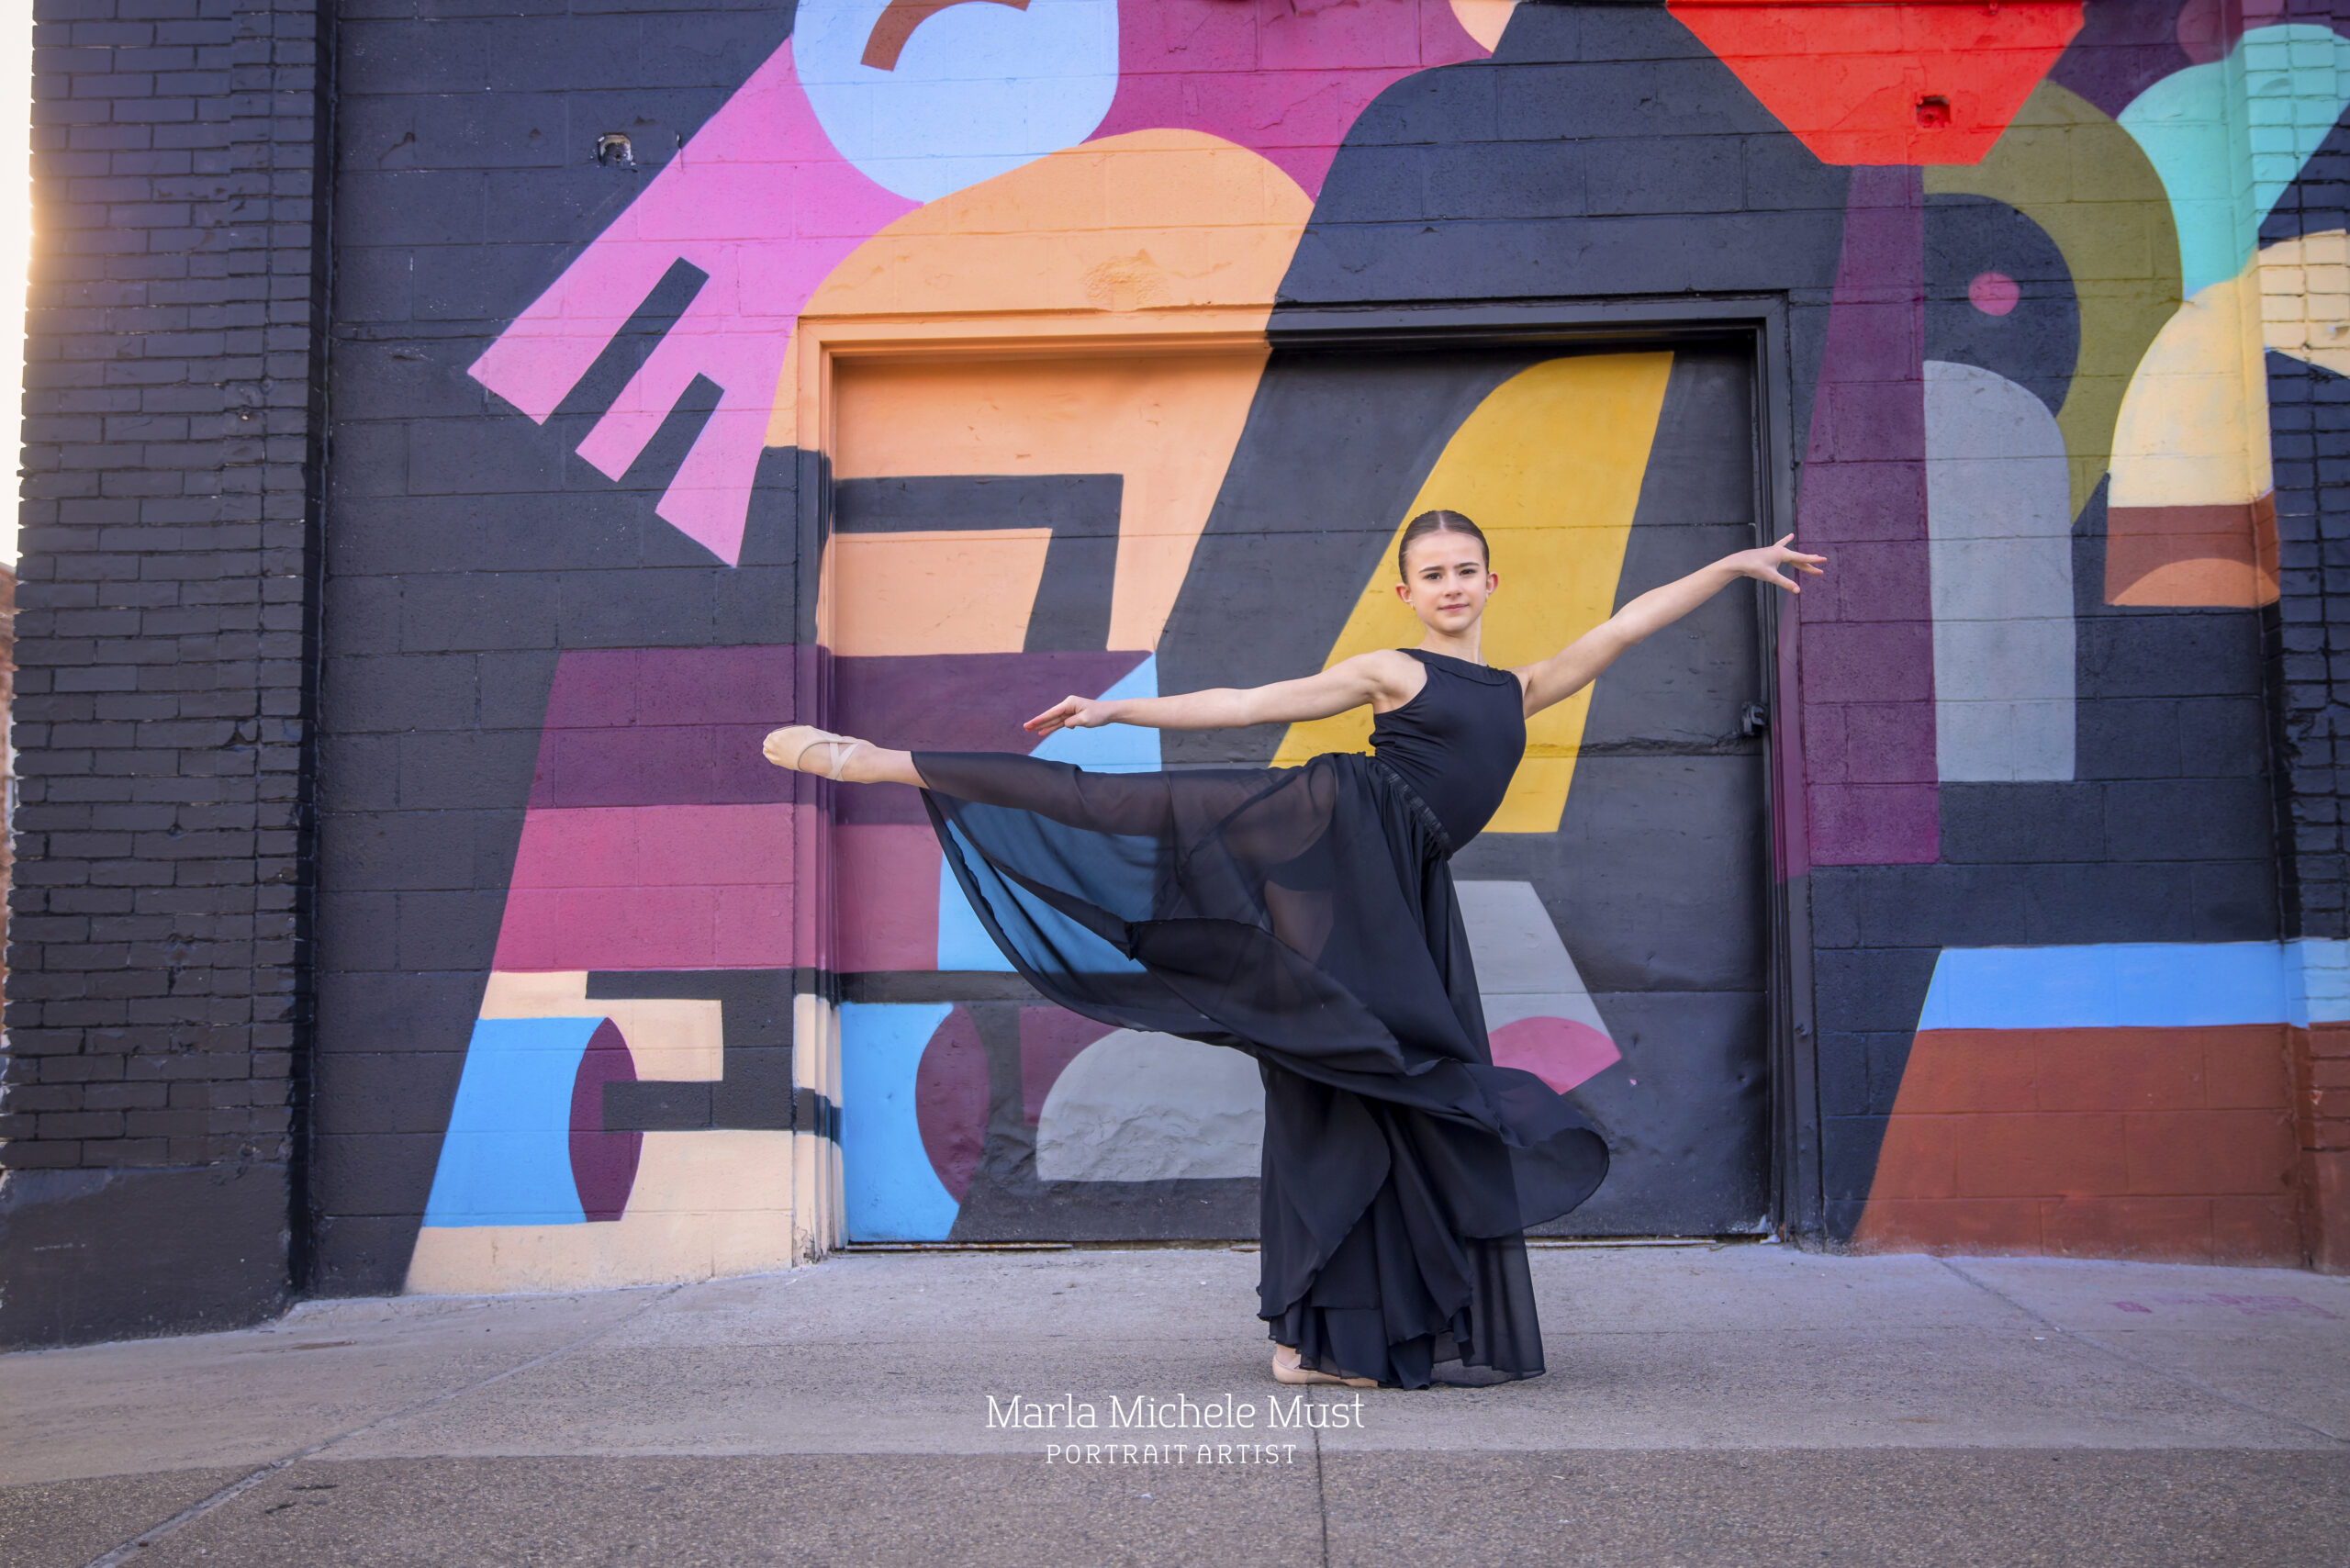 Dancer's leg and arm extensions through her light blue dress shine in this stunning dance portrait, captured by a talented Detroit photographer in front of a brightly colored abstract mural.